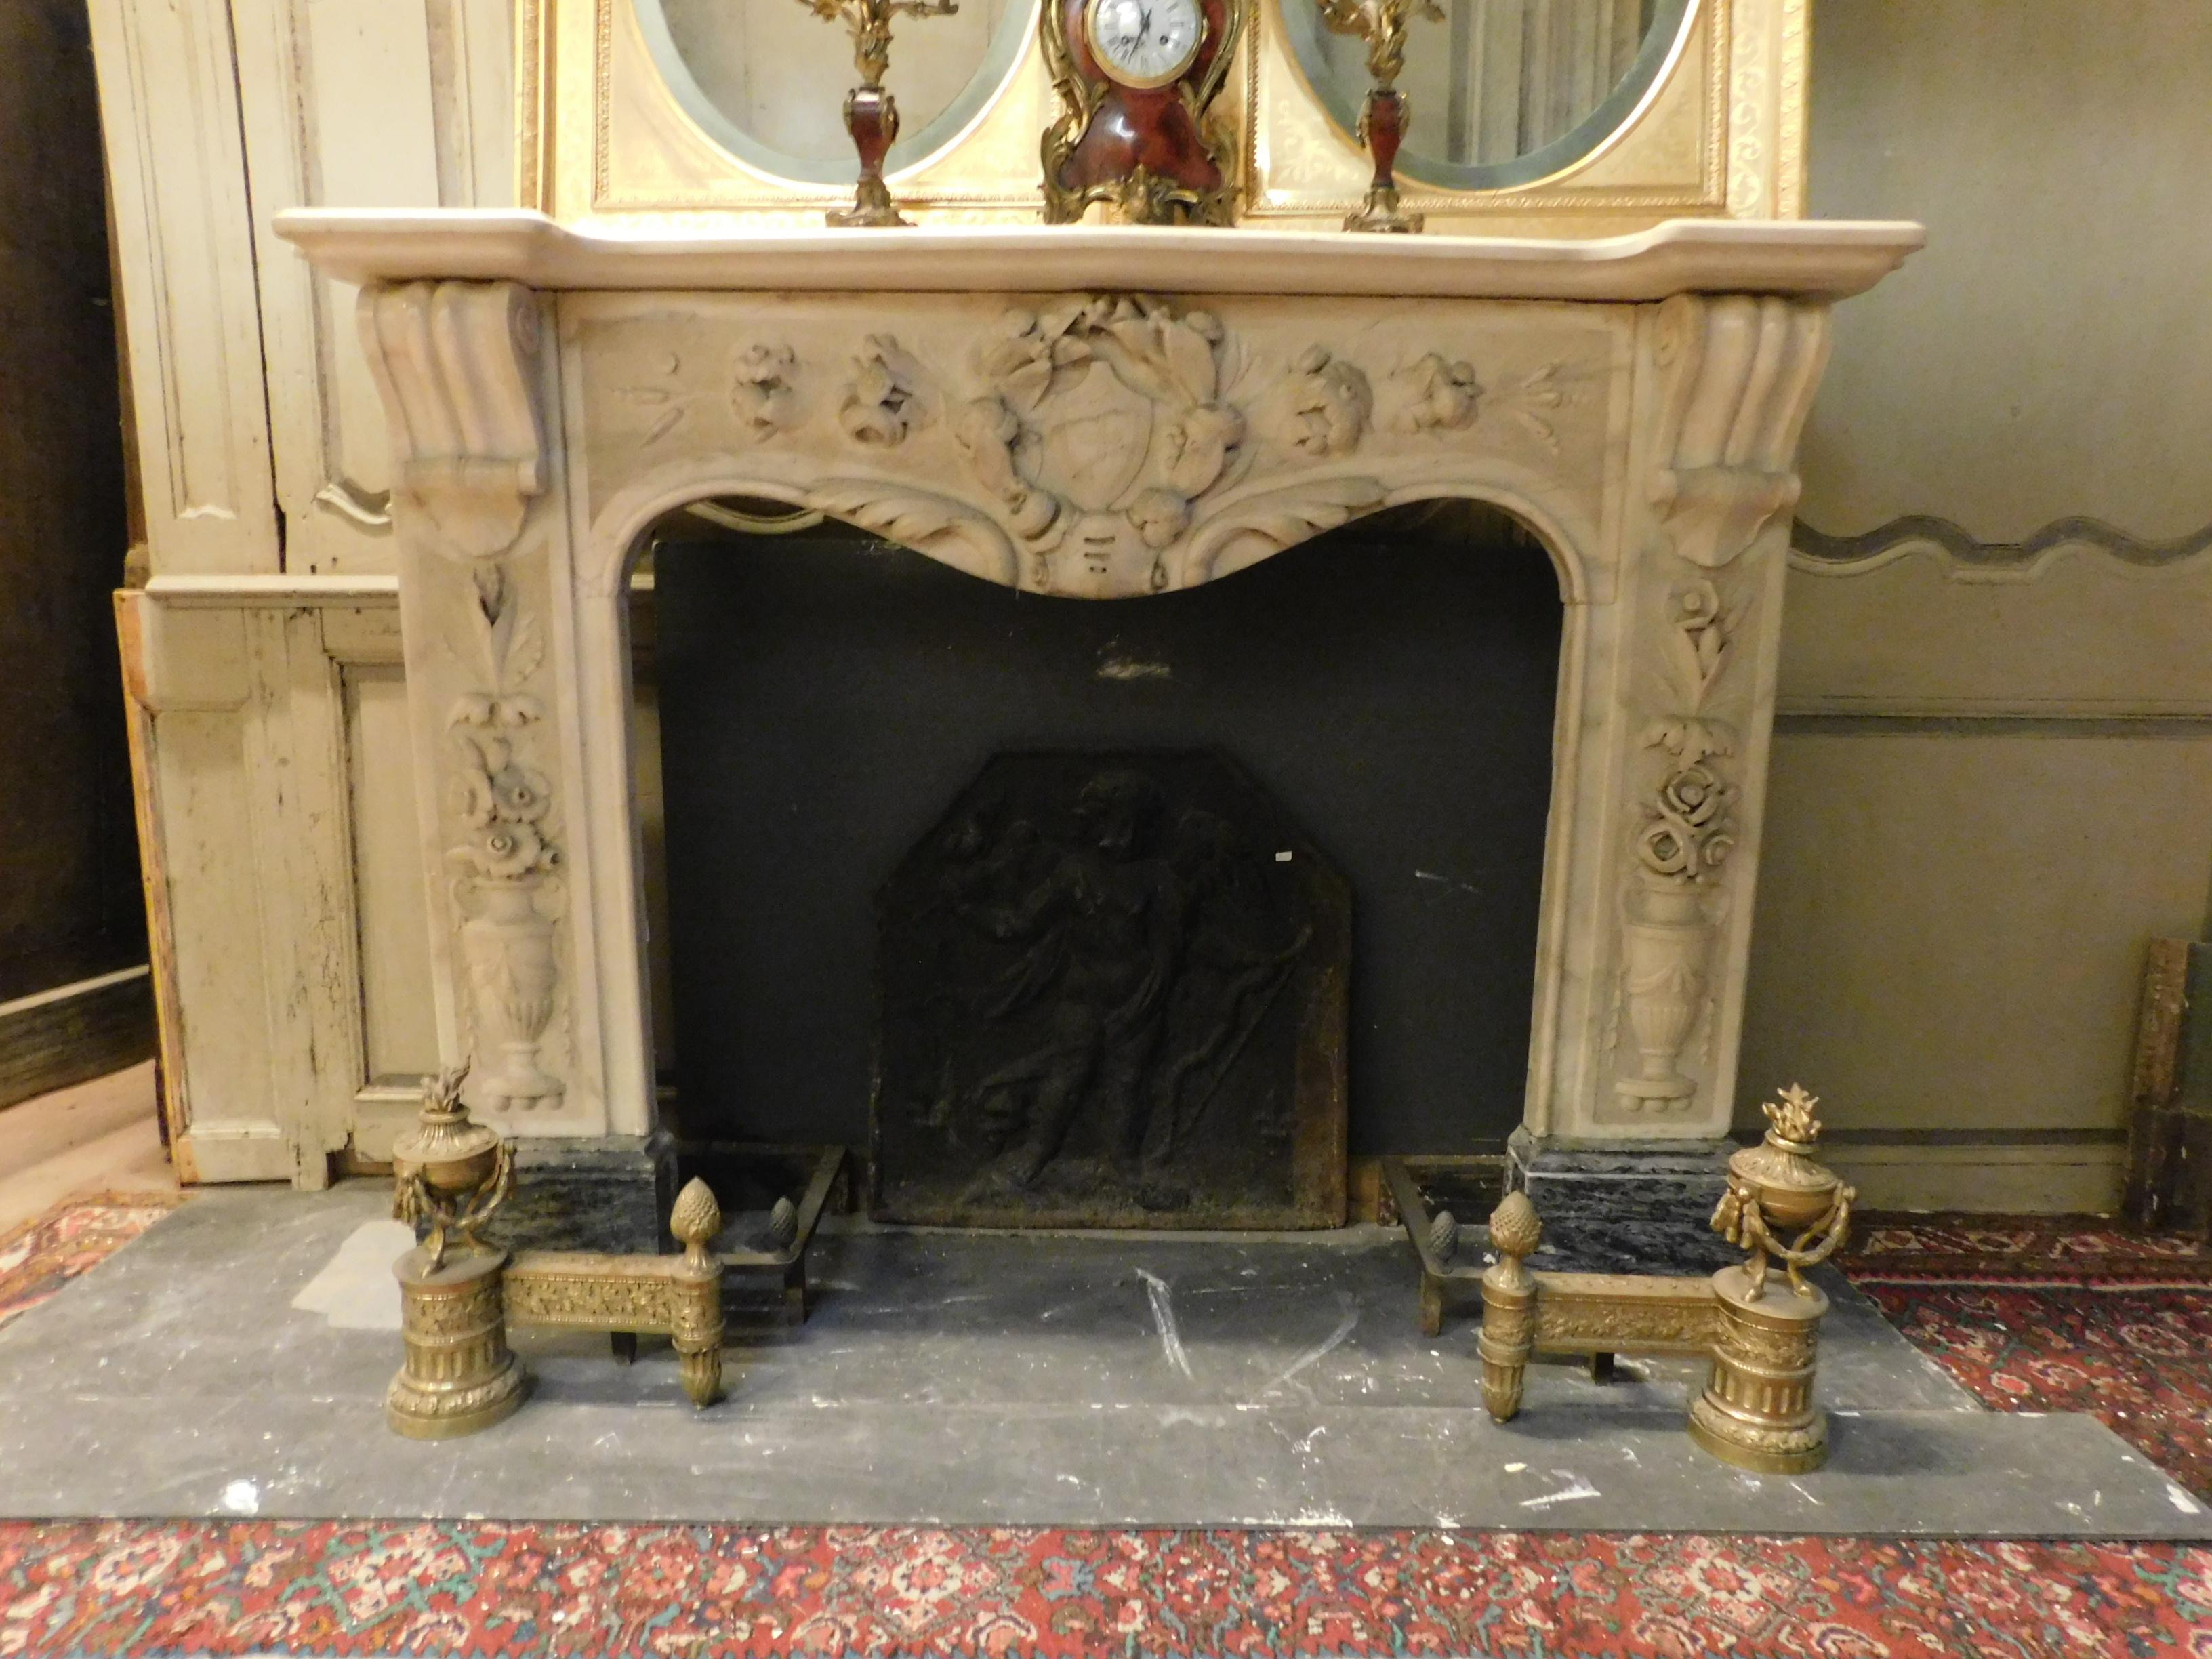 Italian Antique Fireplace Mantle White Carrara Marble, Richly Carved, 19th Century Italy For Sale